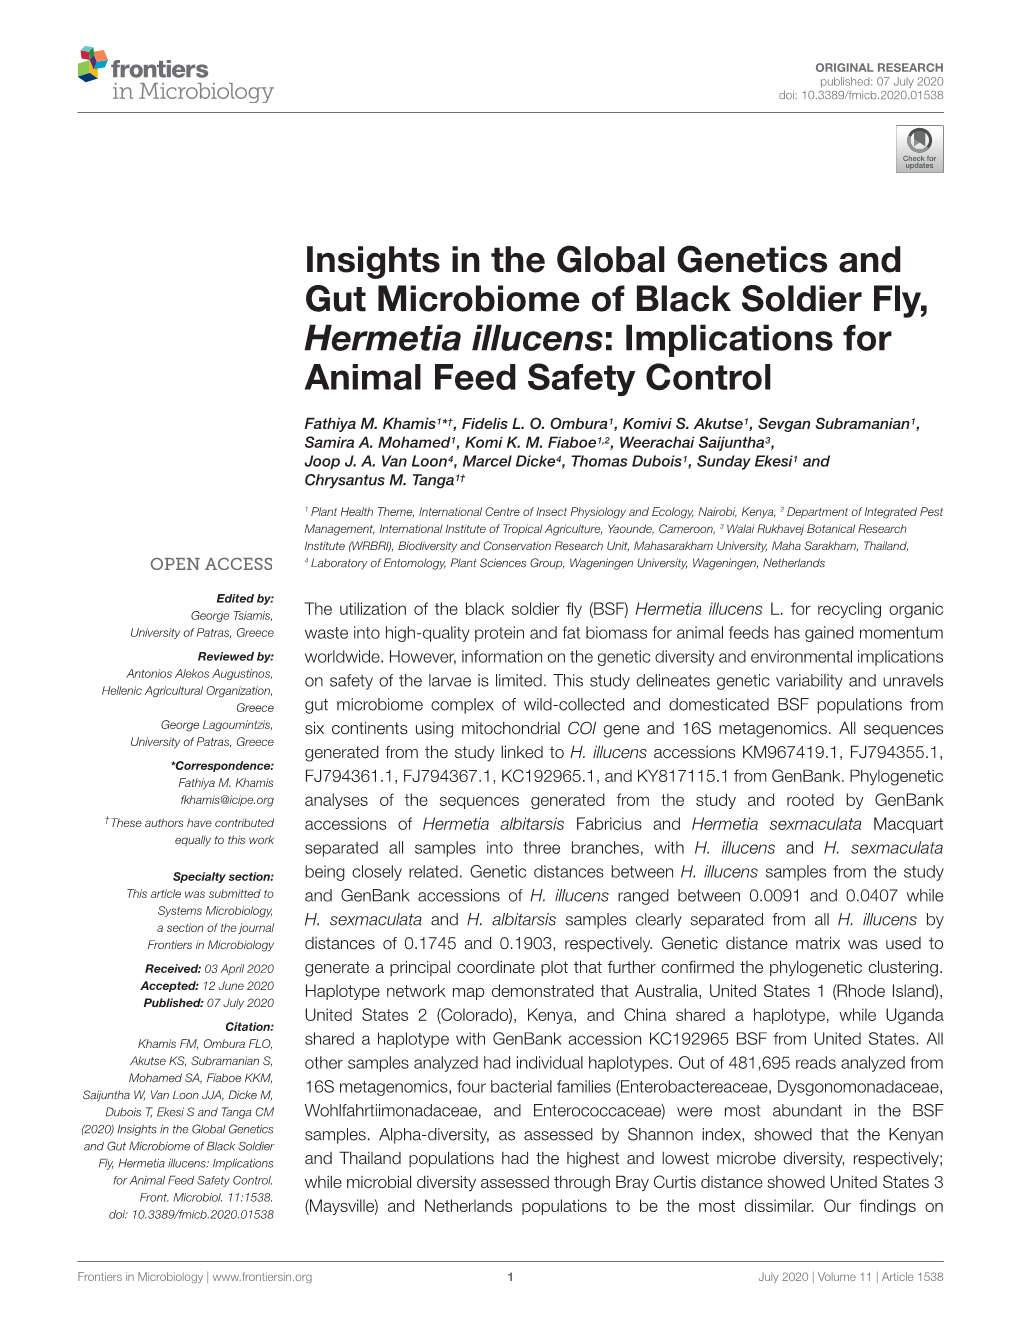 Insights in the Global Genetics and Gut Microbiome of Black Soldier Fly, Hermetia Illucens: Implications for Animal Feed Safety Control